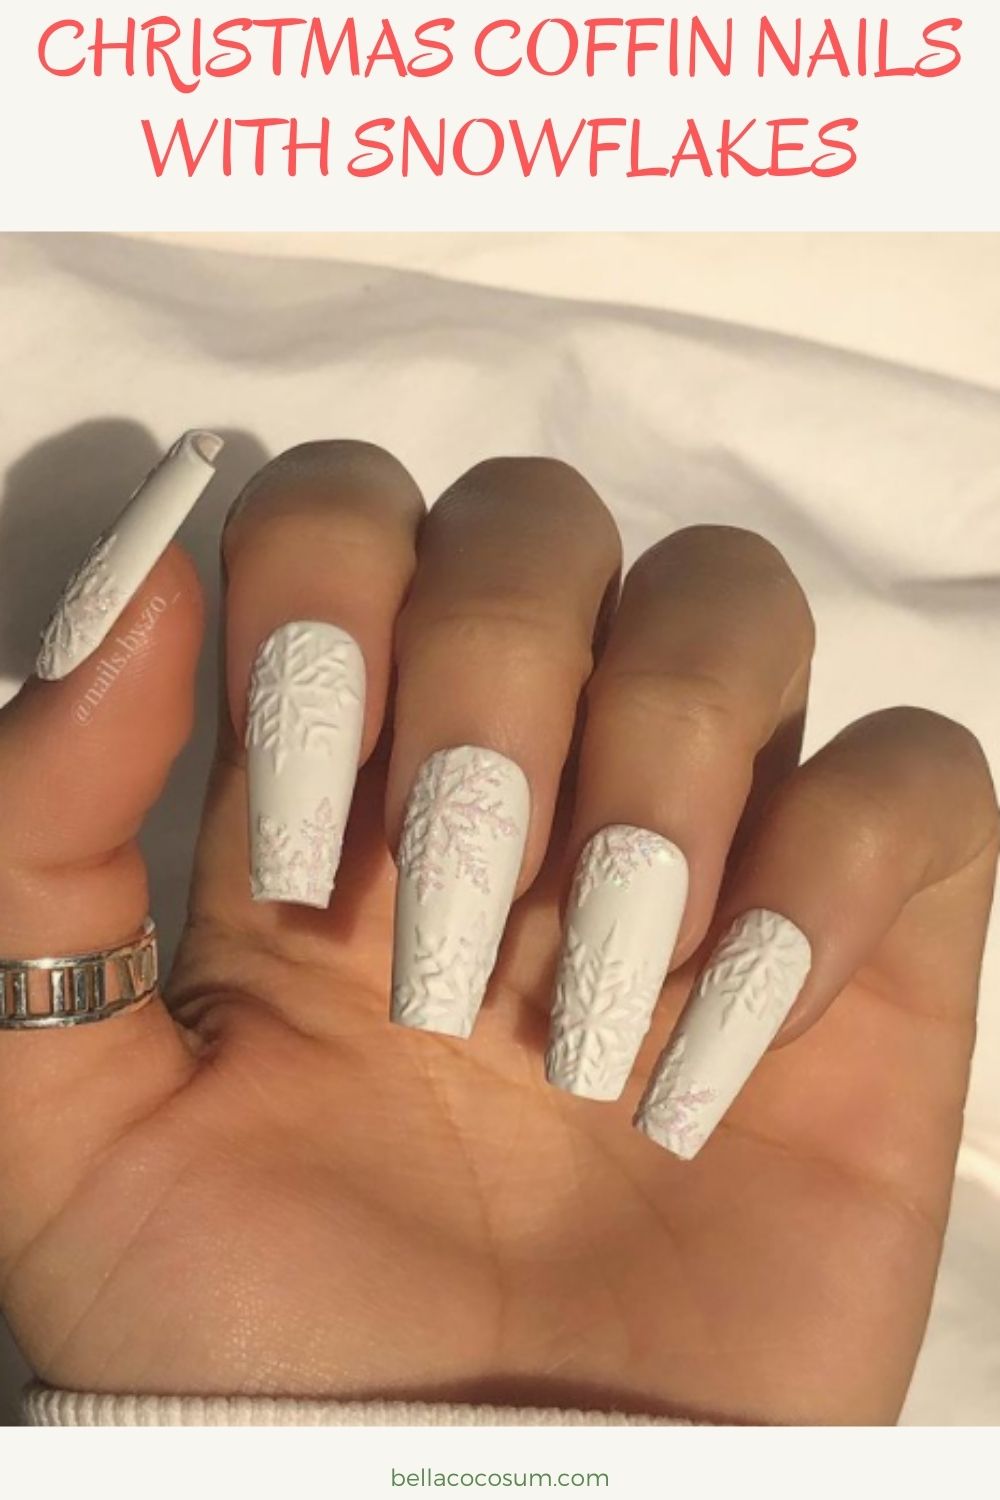 Christmas coffin nails with snowflakes